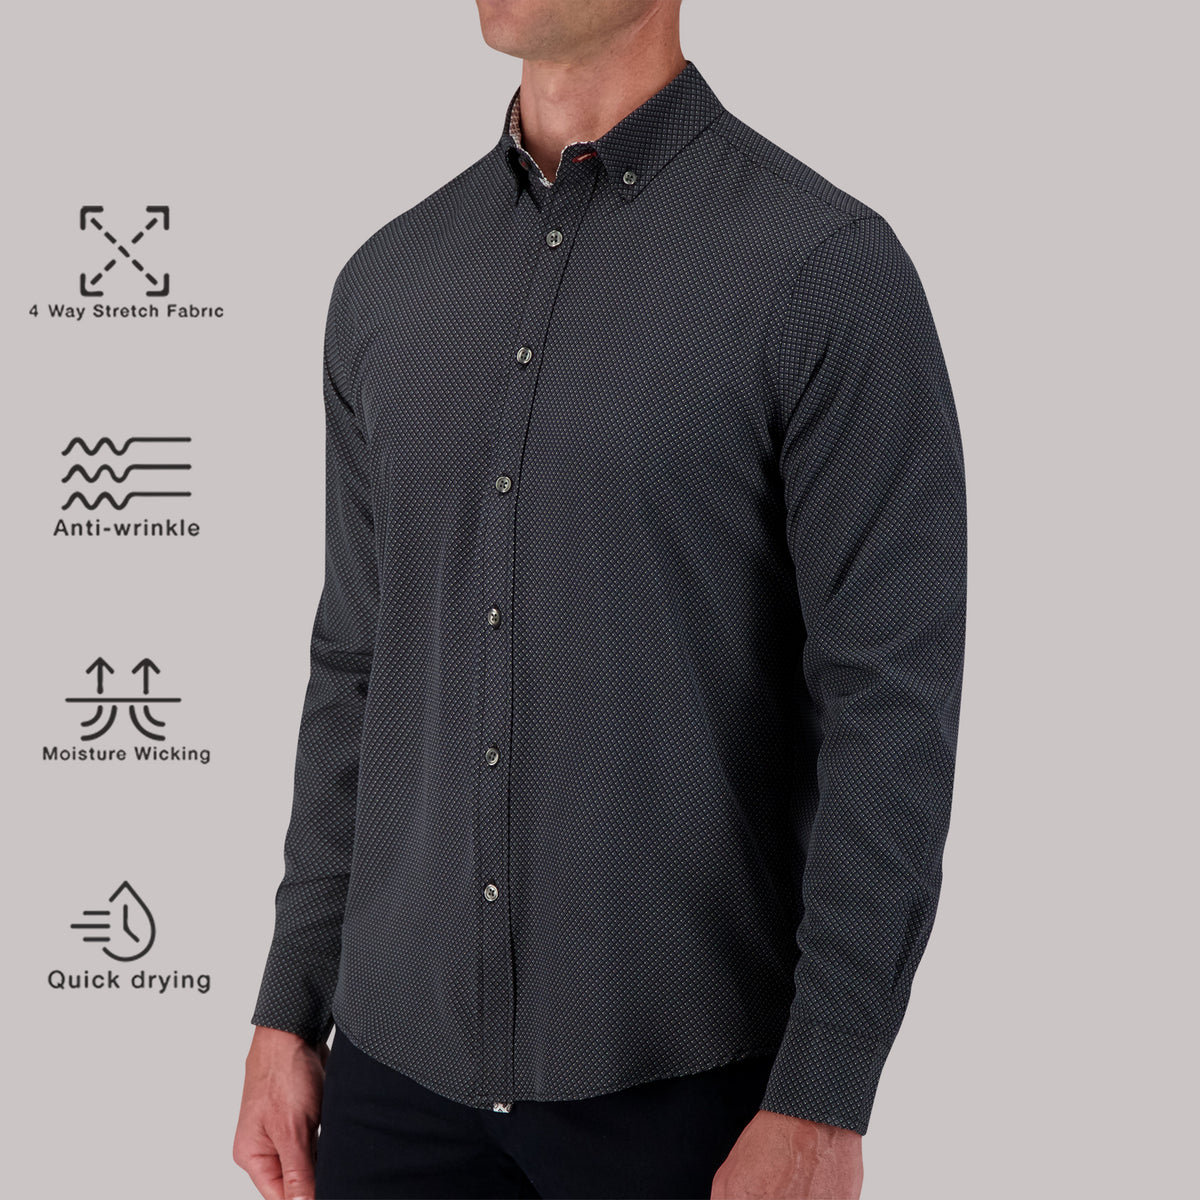 Model Side View of Long Sleeve 4-Way Sport Shirt with Geo Dots Print in Black with description of material being 4 way stretch fabric, anti-wrinkle, moisture wicking and quick drying